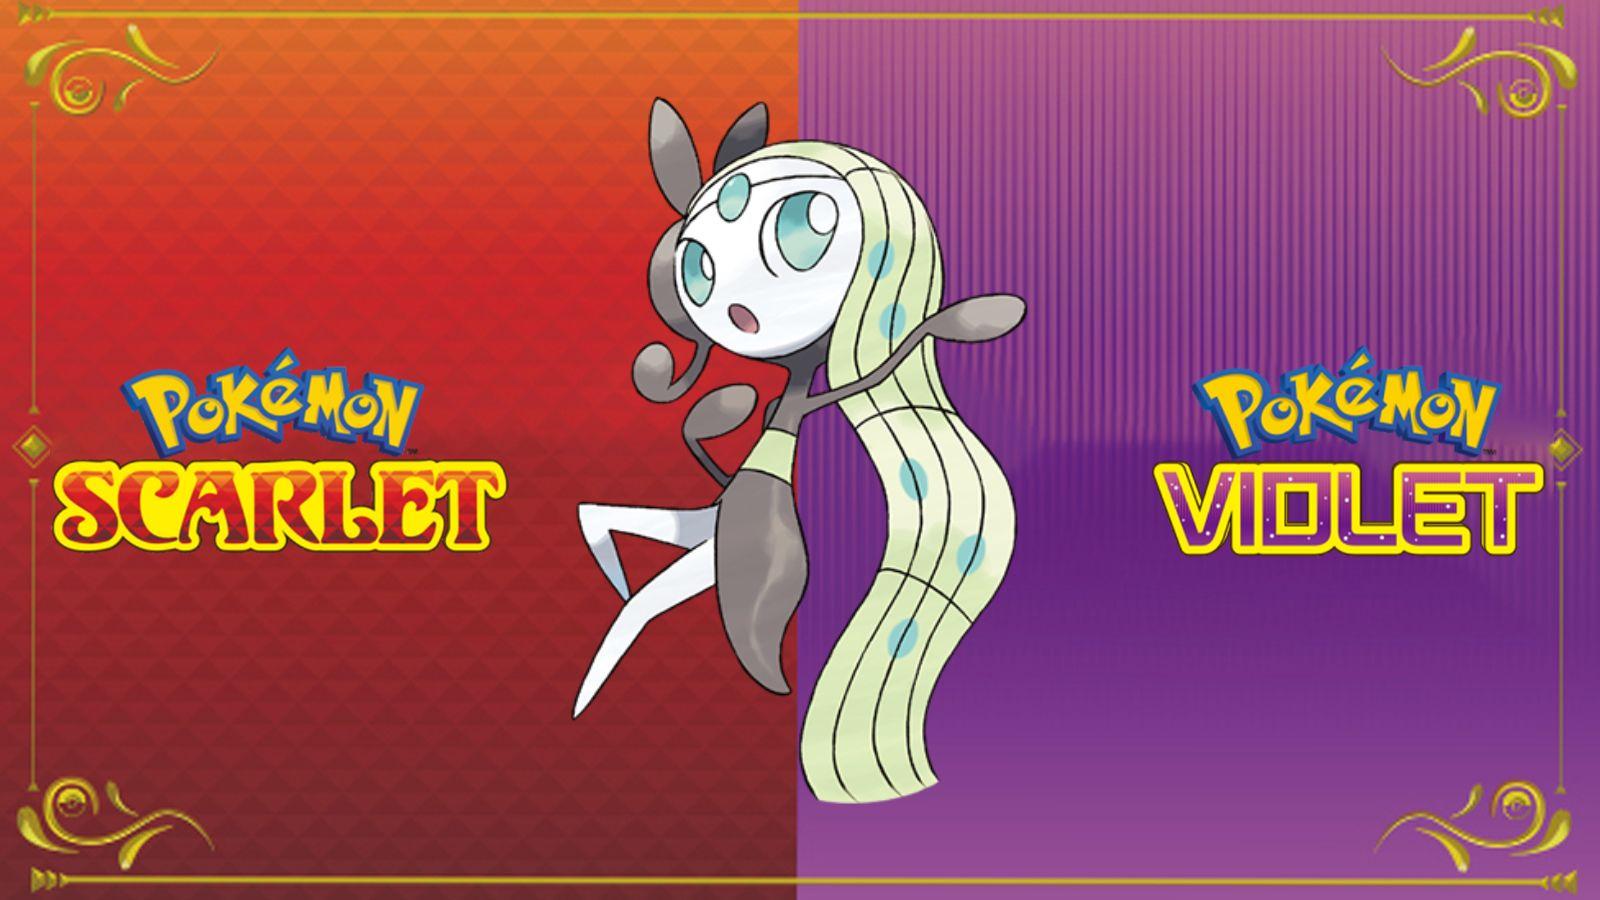 Free meloetta for all trainers, New way to get meloetta in pokemon go